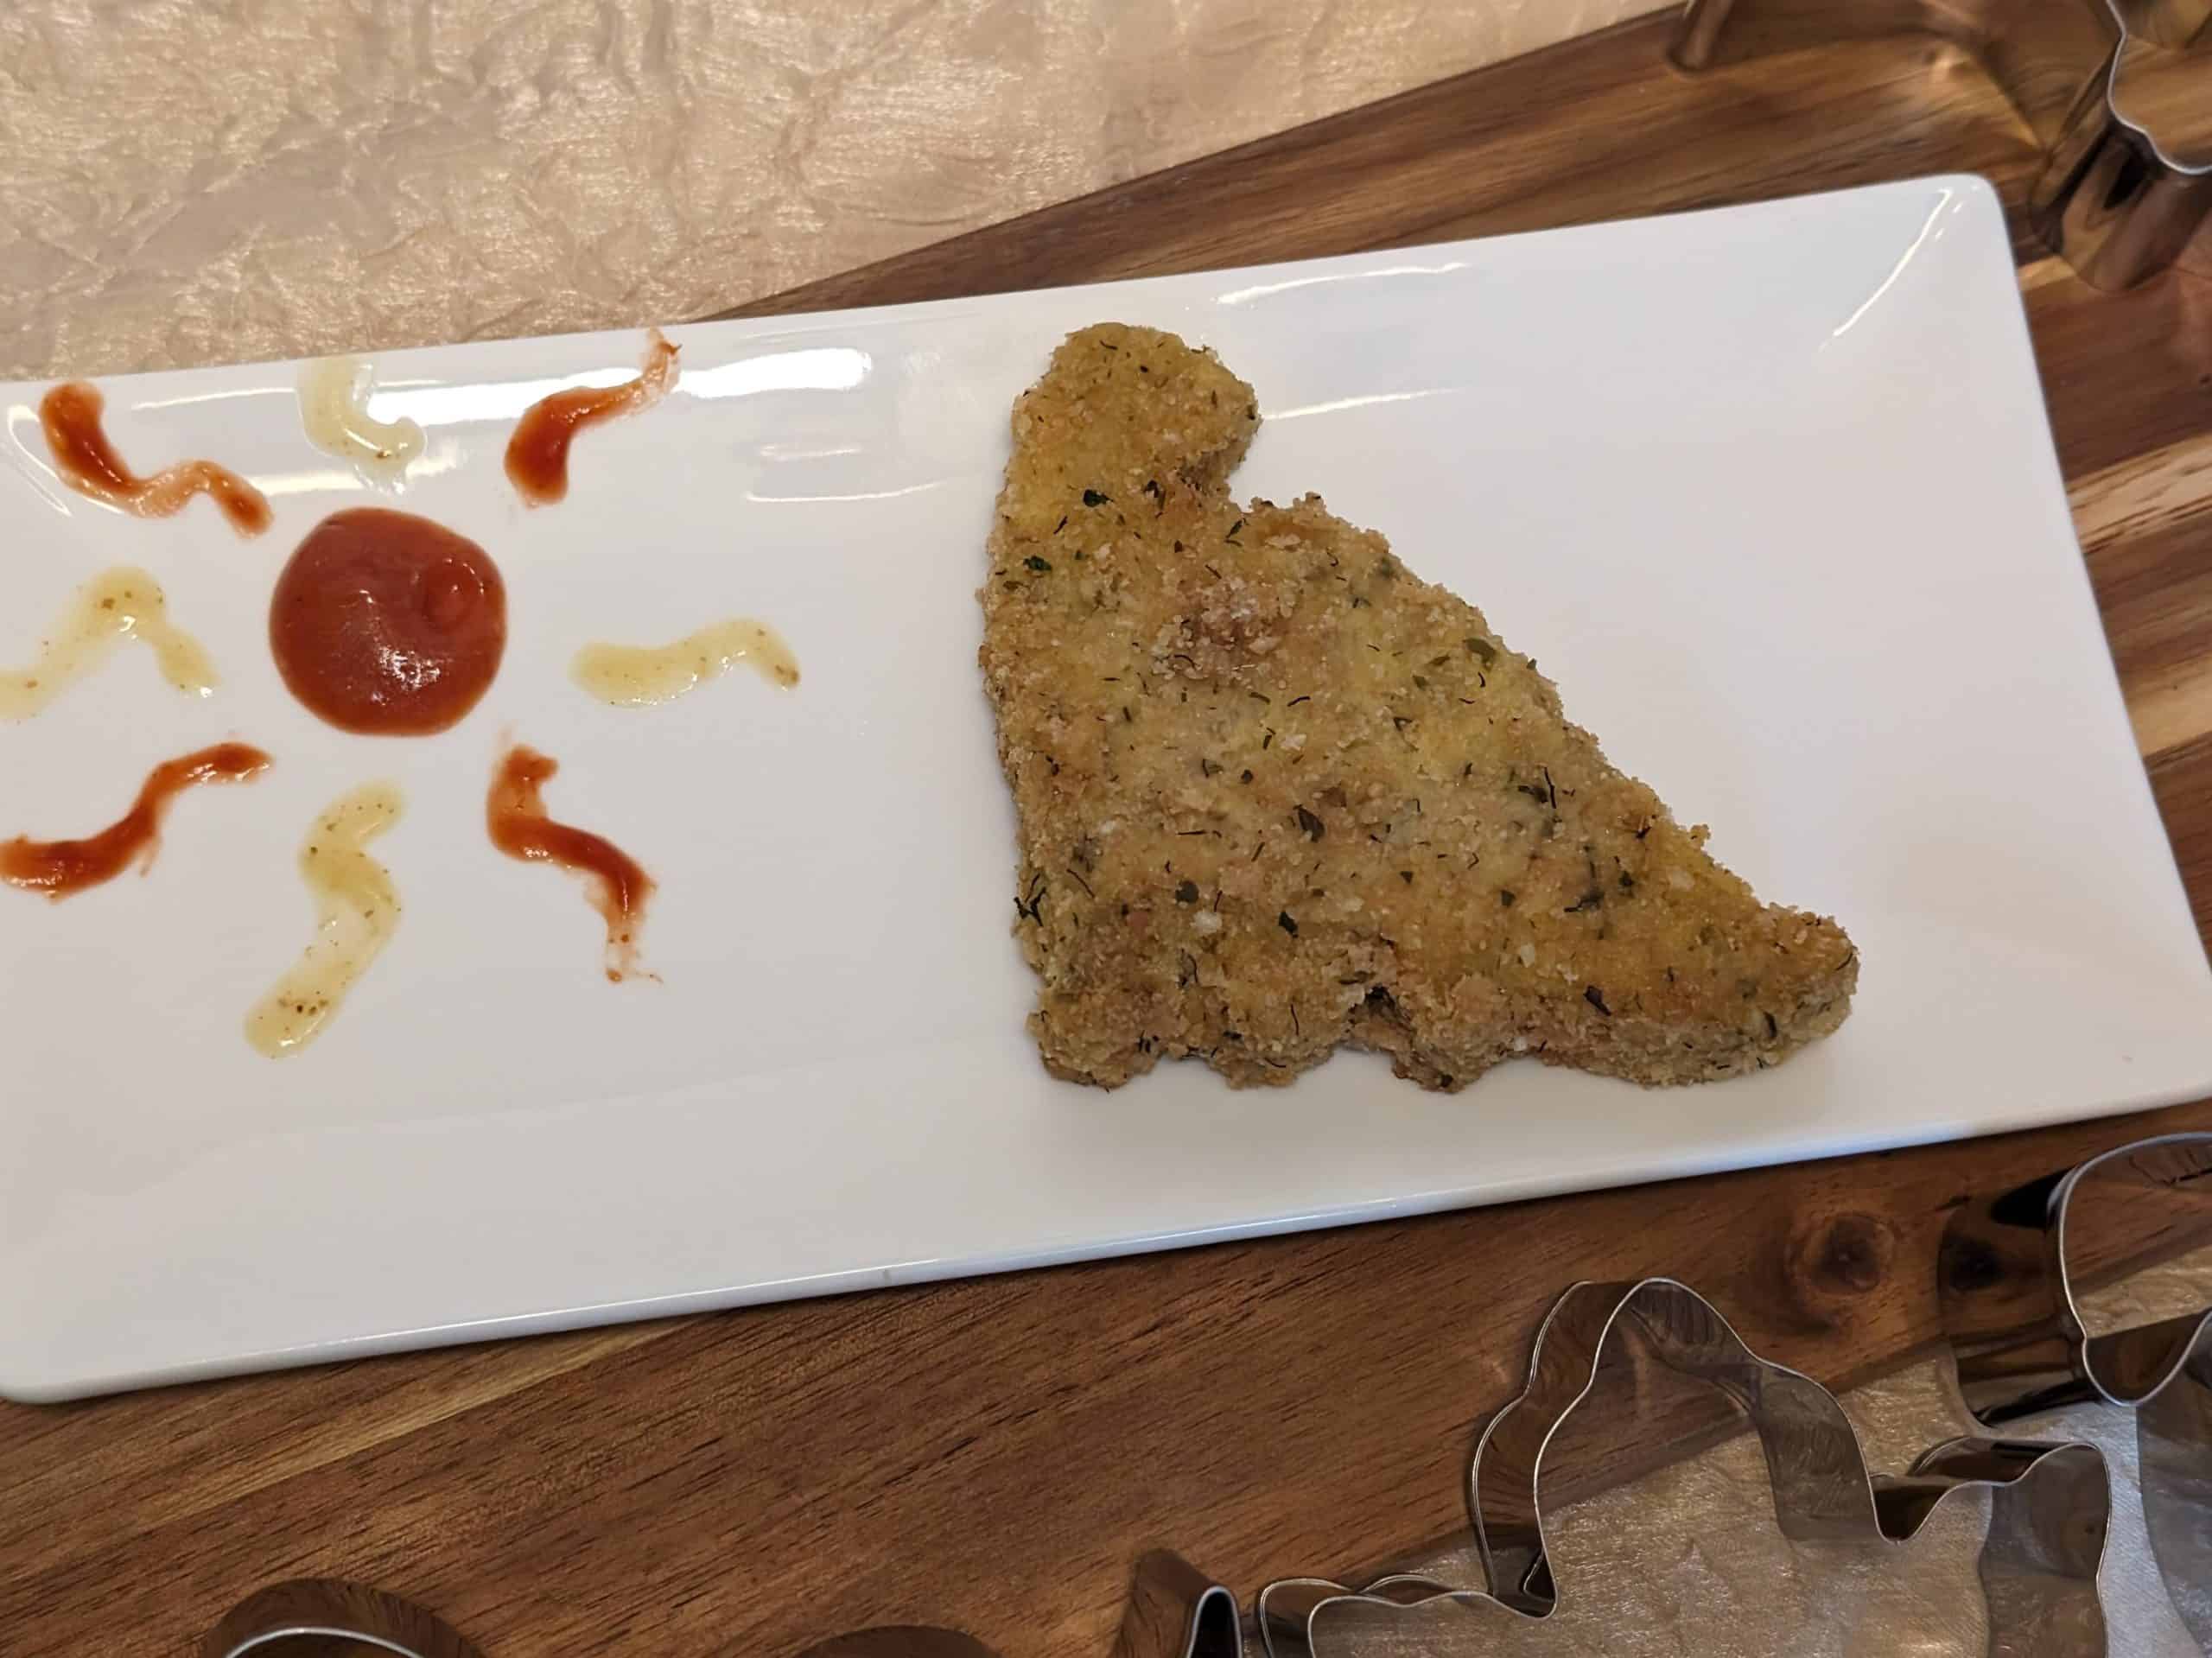 Gluten-Free Dinosaur Chicken Patty on a plate with dabs of Sugar Free Honey Mustard Dipping Sauce and No Sugar Added Ketchup on the plate next to it in the shape of a sun